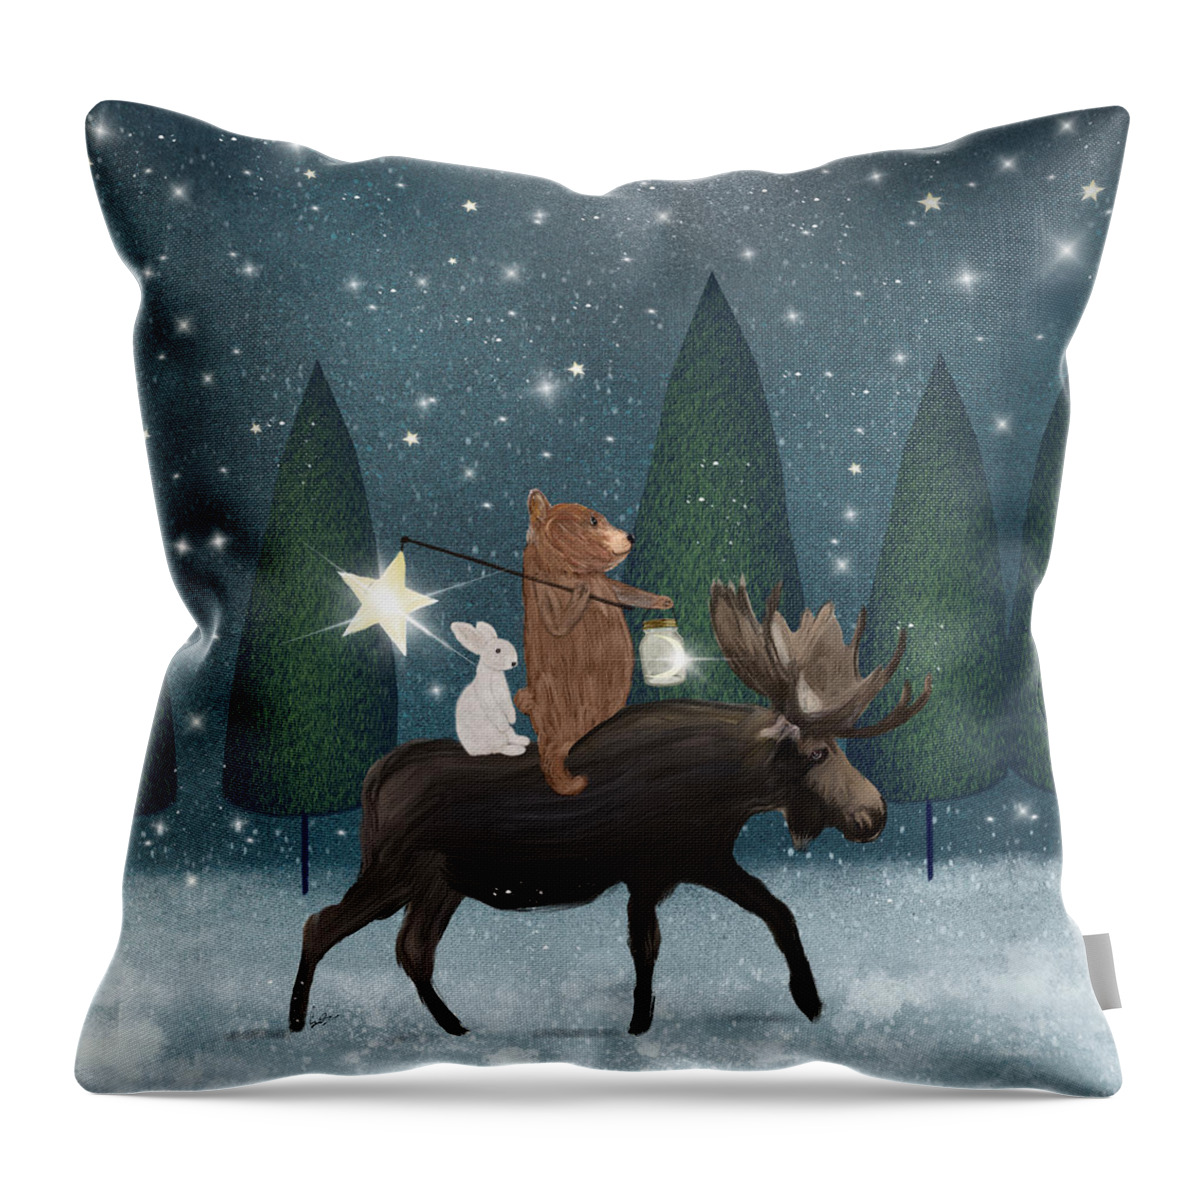 Childrens Throw Pillow featuring the painting The Elder Moose by Bri Buckley